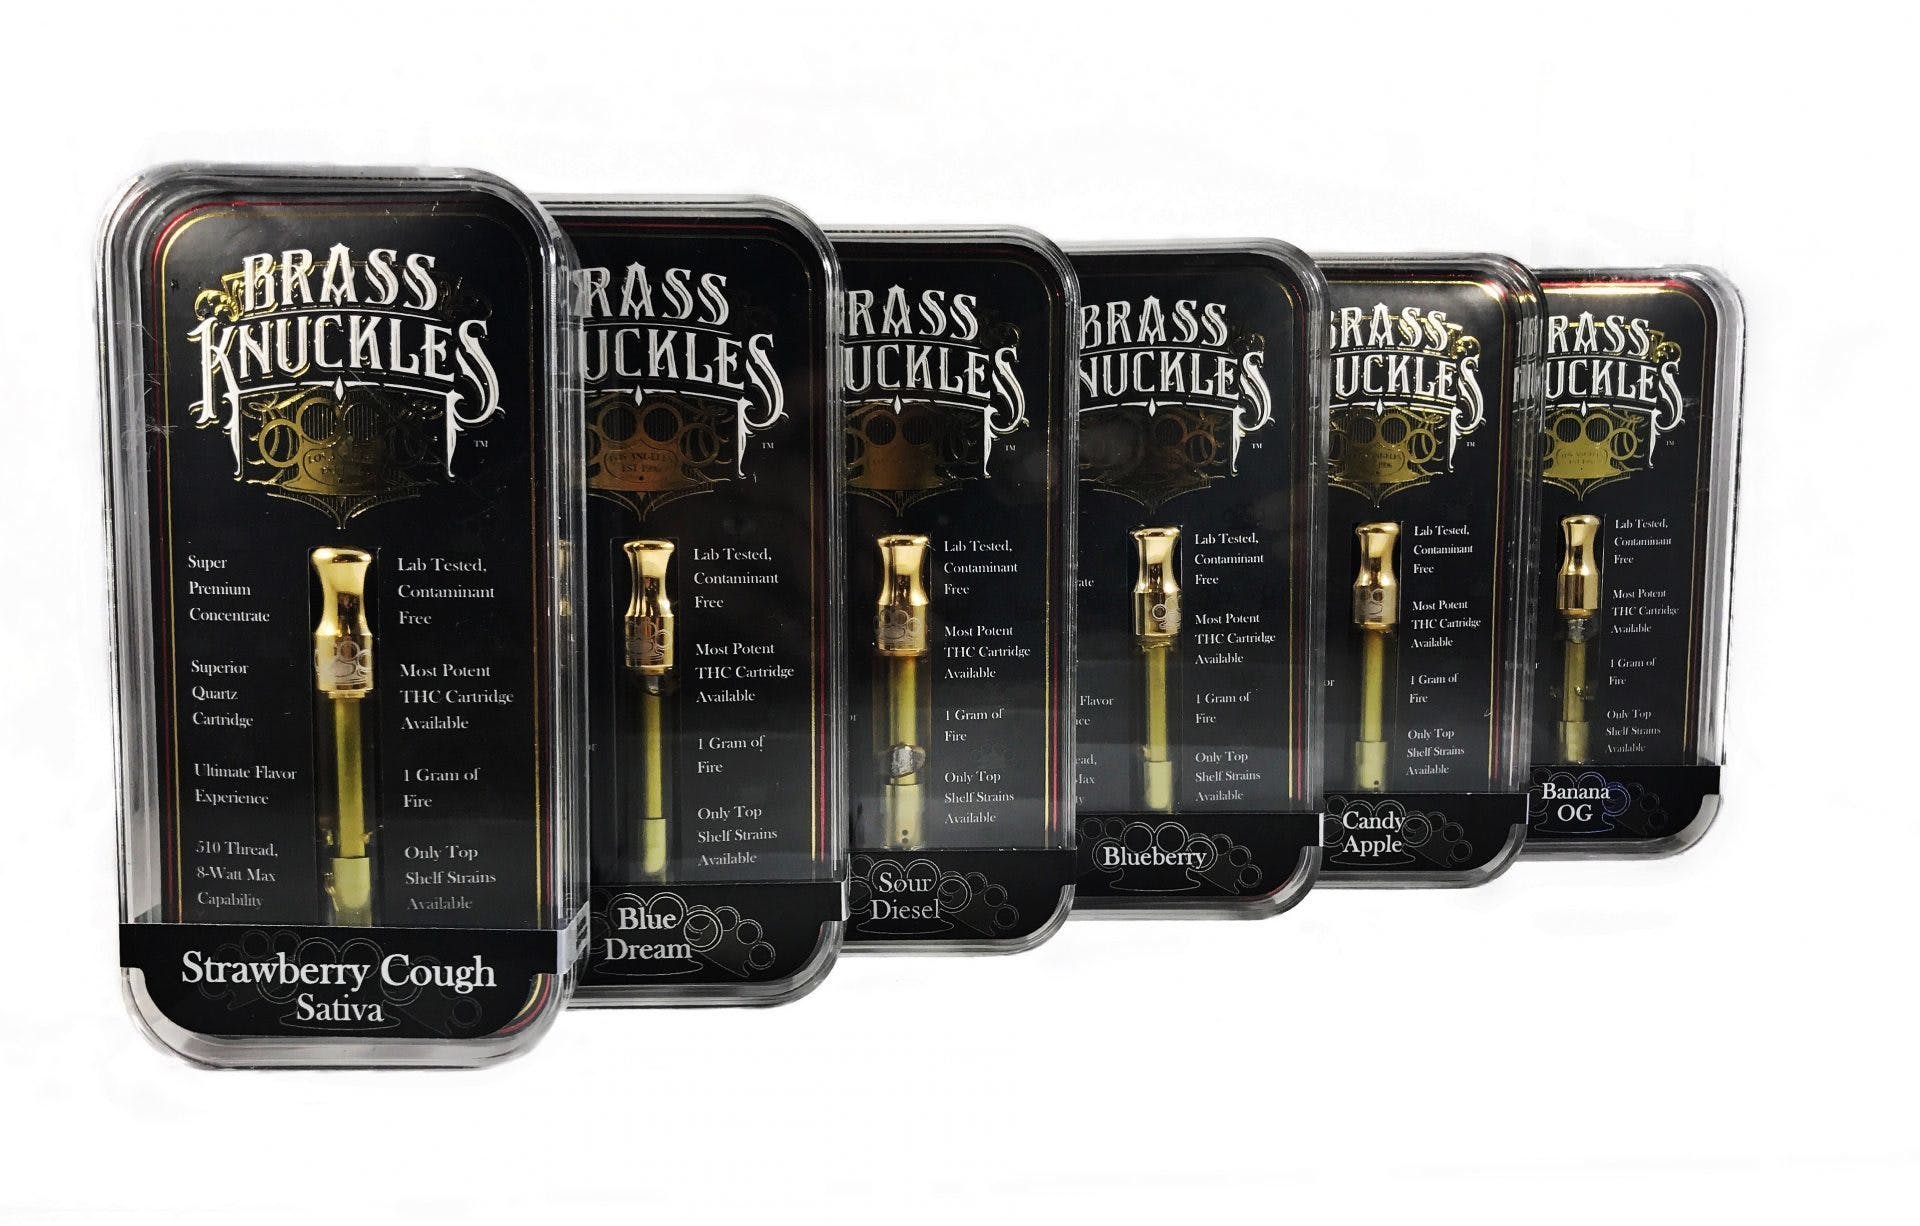 concentrate-brass-knuckles-jack-h-3-for-90-21-mix-and-match